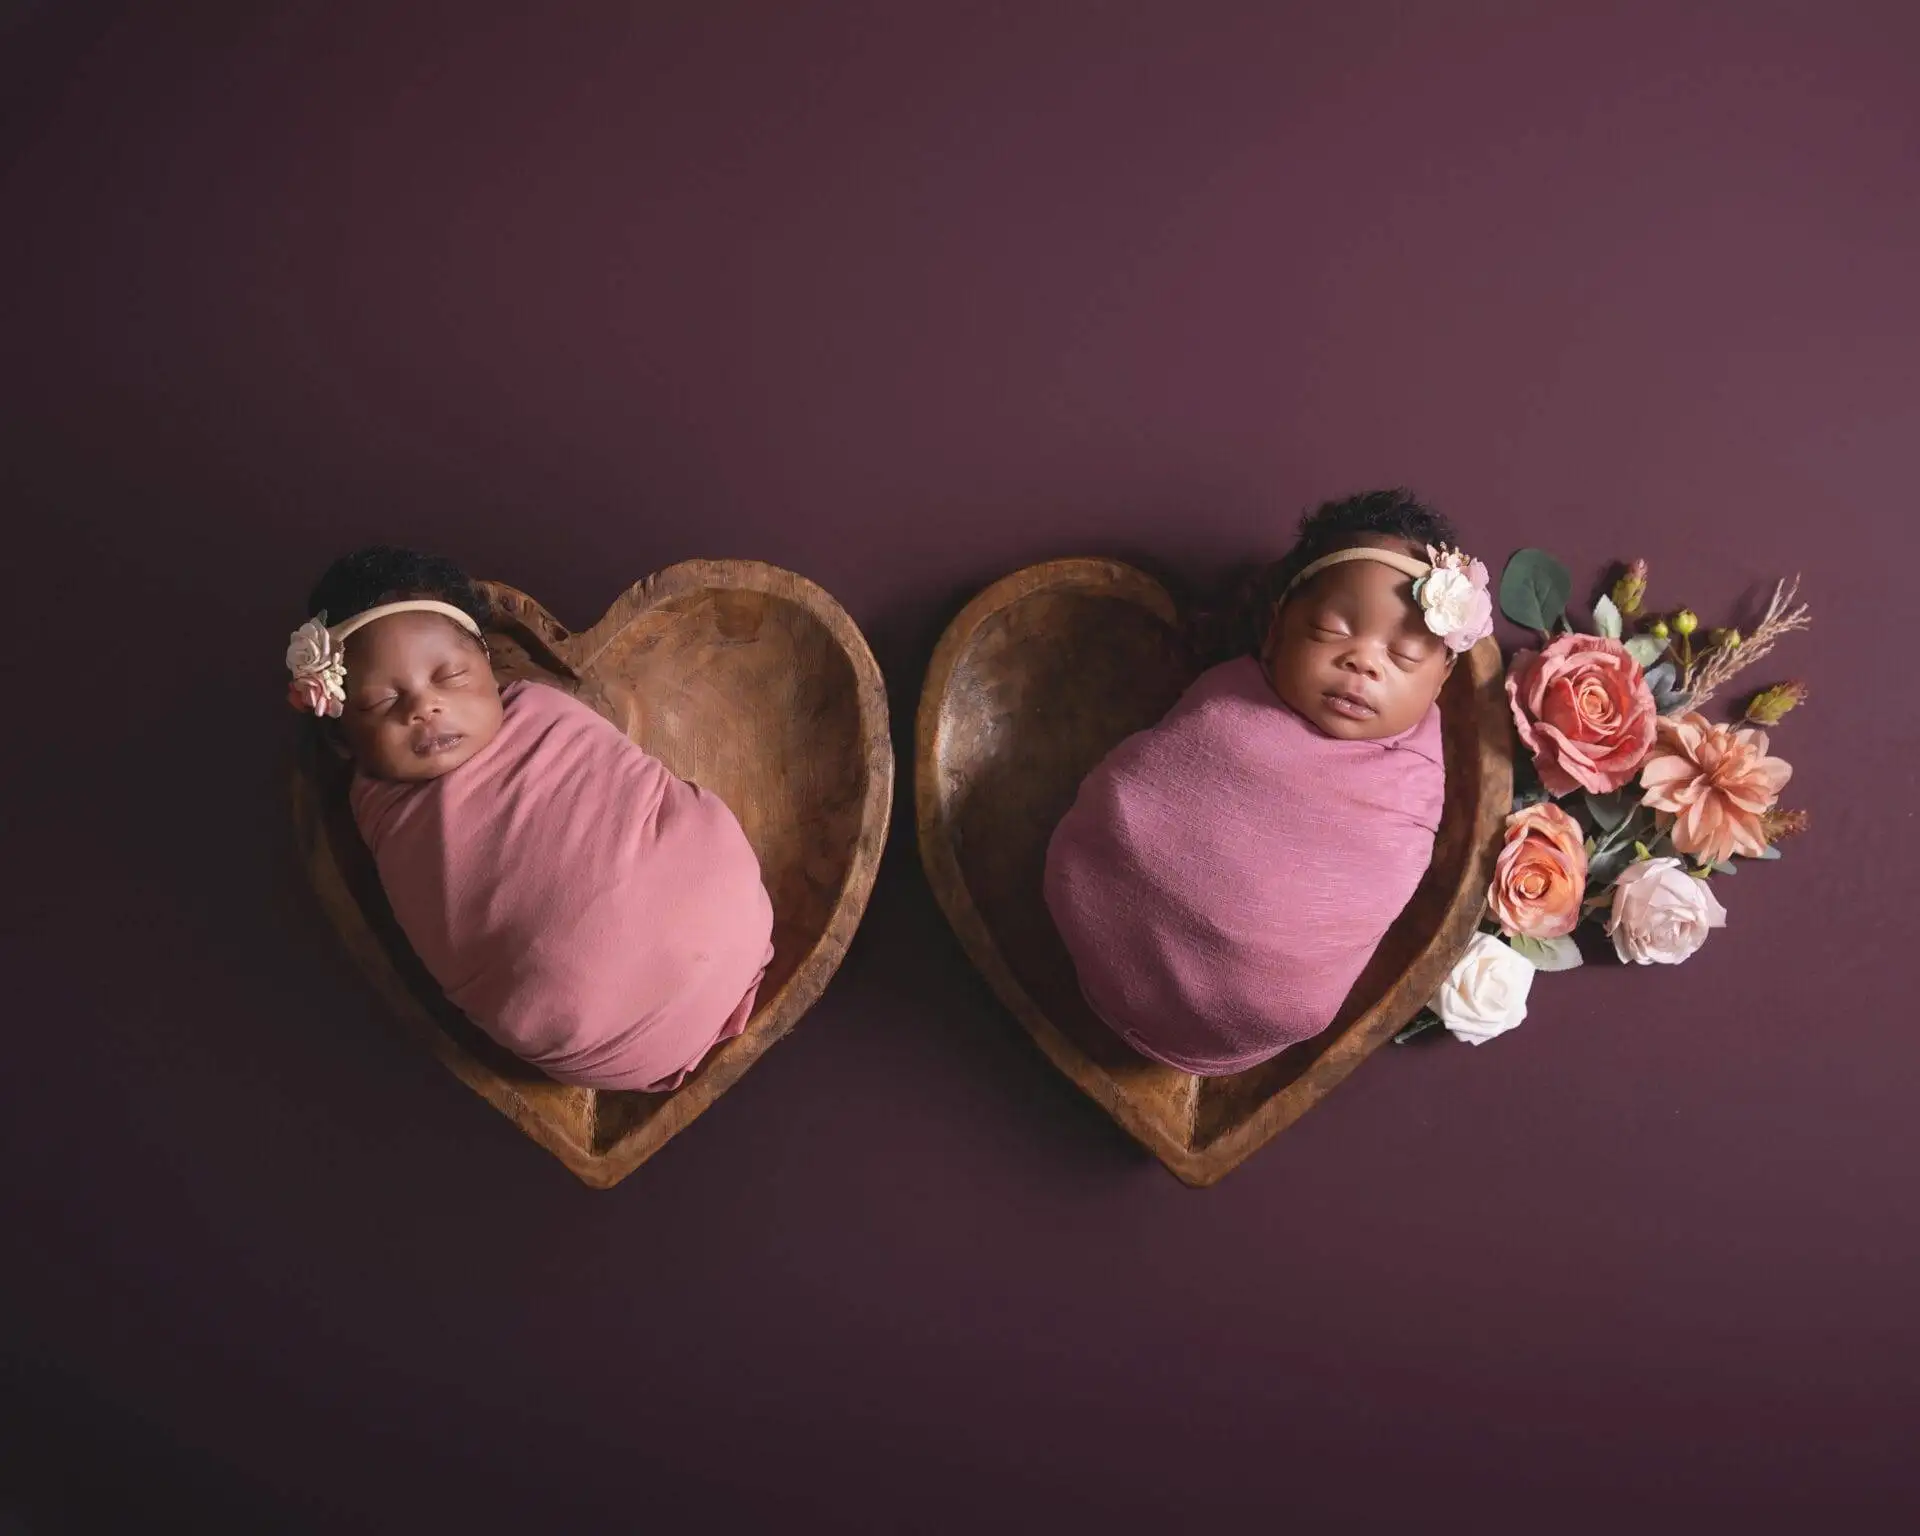 Two adorable newborn babies peacefully nestled in heart-shaped wooden bowls, beautifully adorned with delicate floral accents.